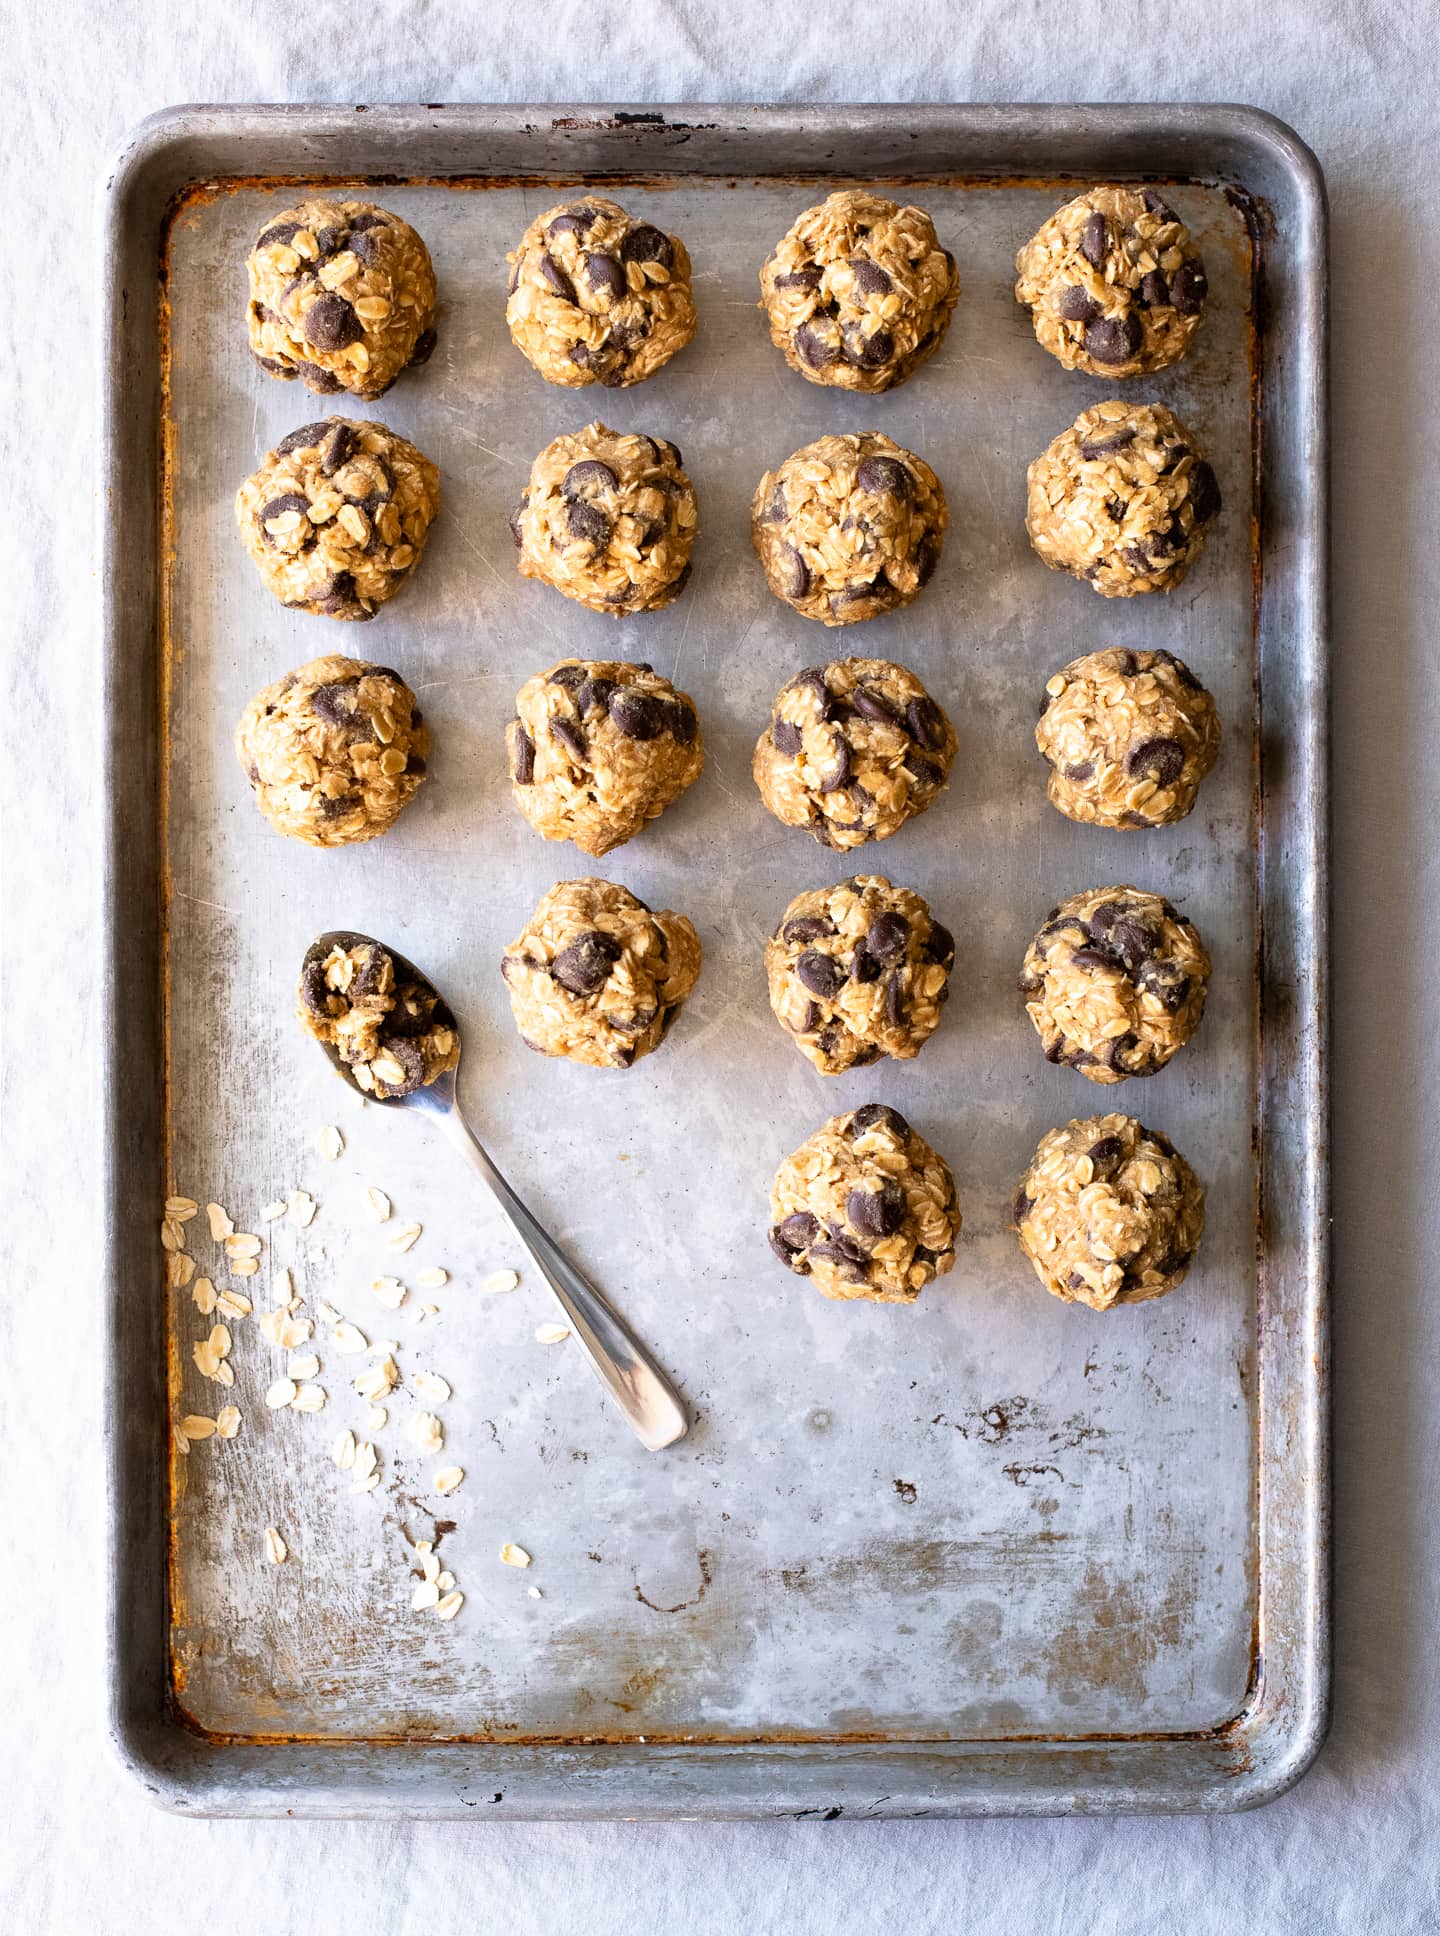 Overhead view of gluten-free oatmeal chocolate chip cookie dough balls, arranged in rows on an old metal cookie sheet, along with a spoon used for scooping the dough.